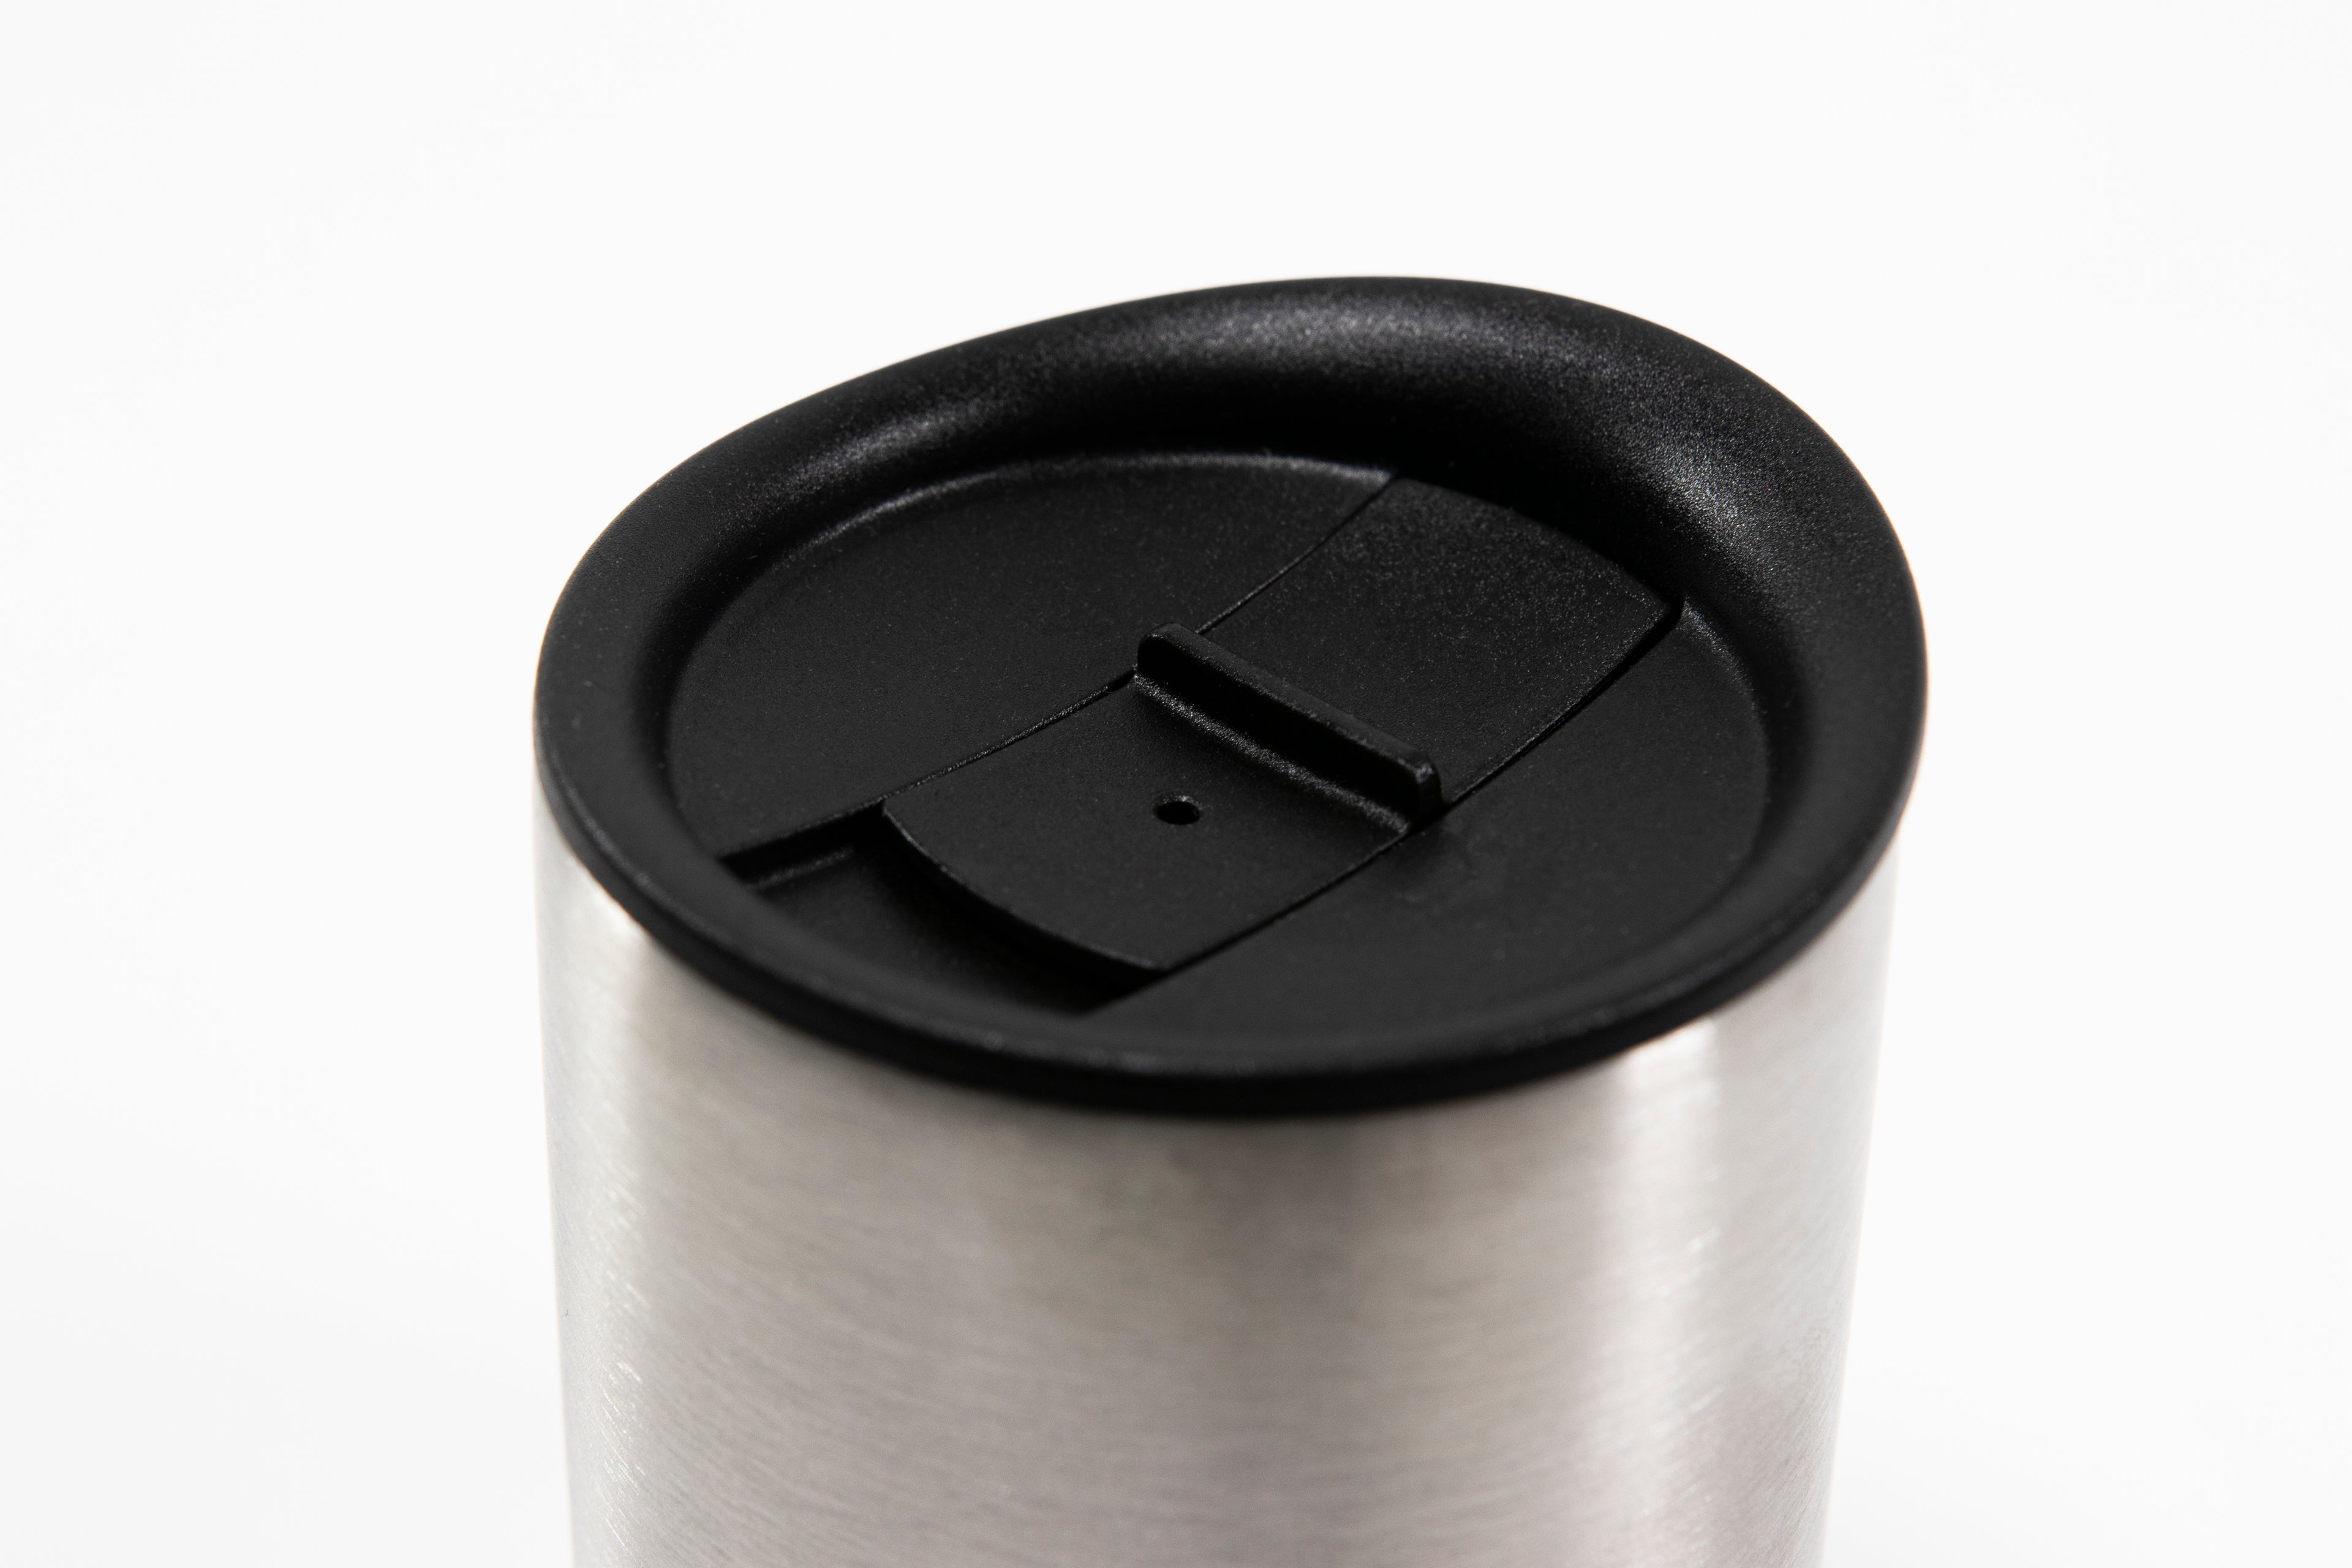 Close up of black silicone lid showing sliding stopper and the top of a short stainless steel insulated mug.